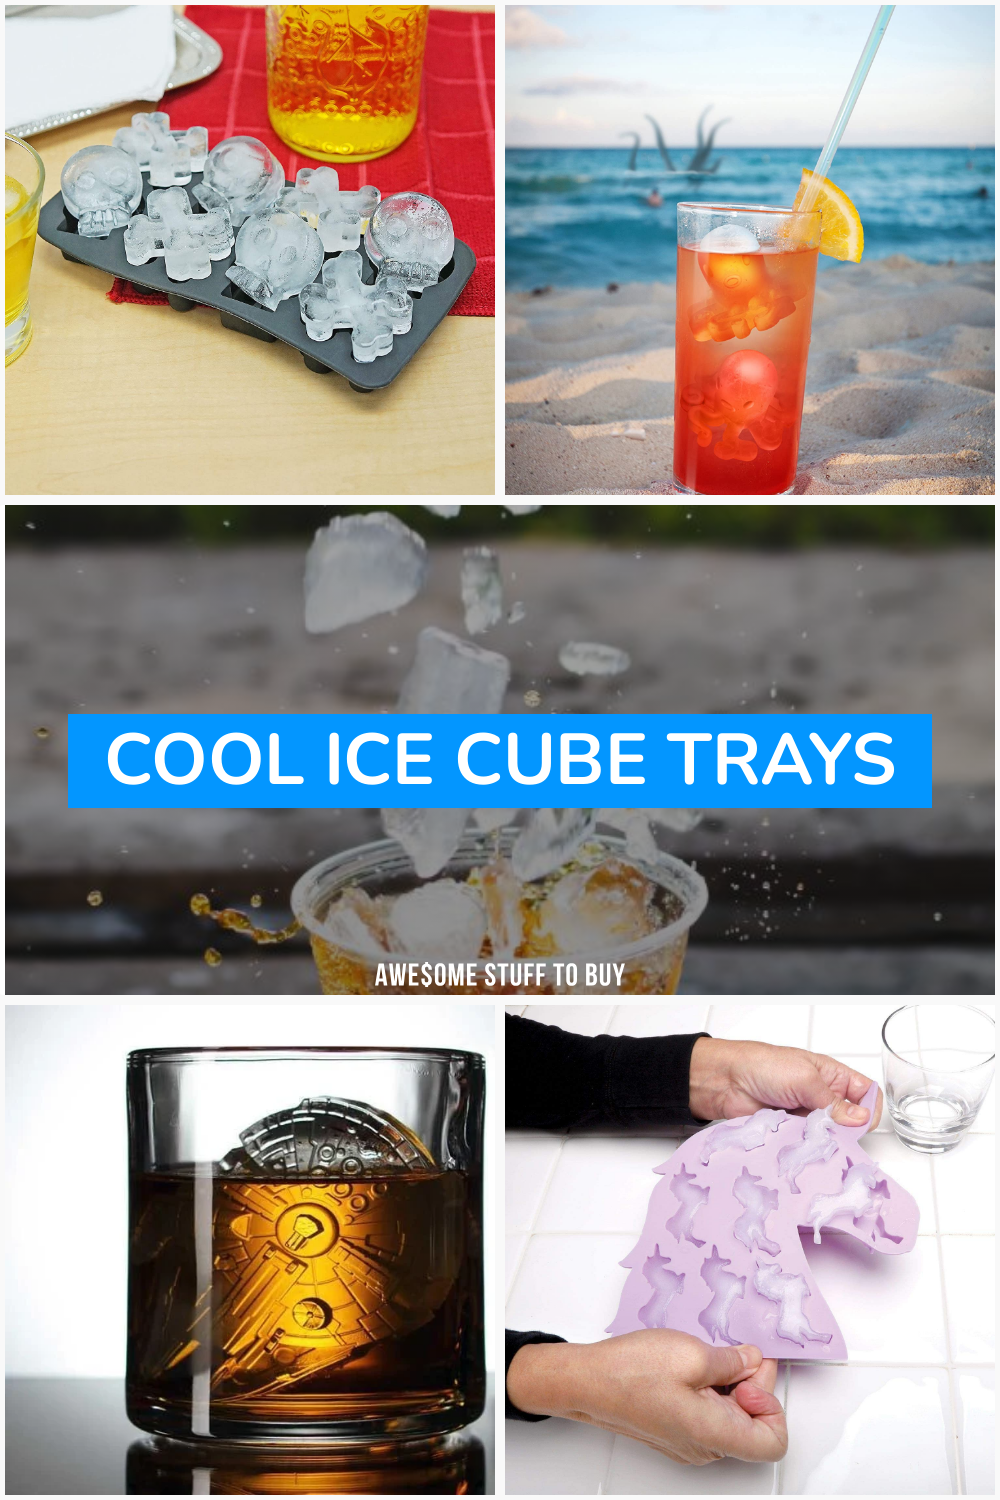 Cool Ice Cube Trays // Awesome Stuff to Buy